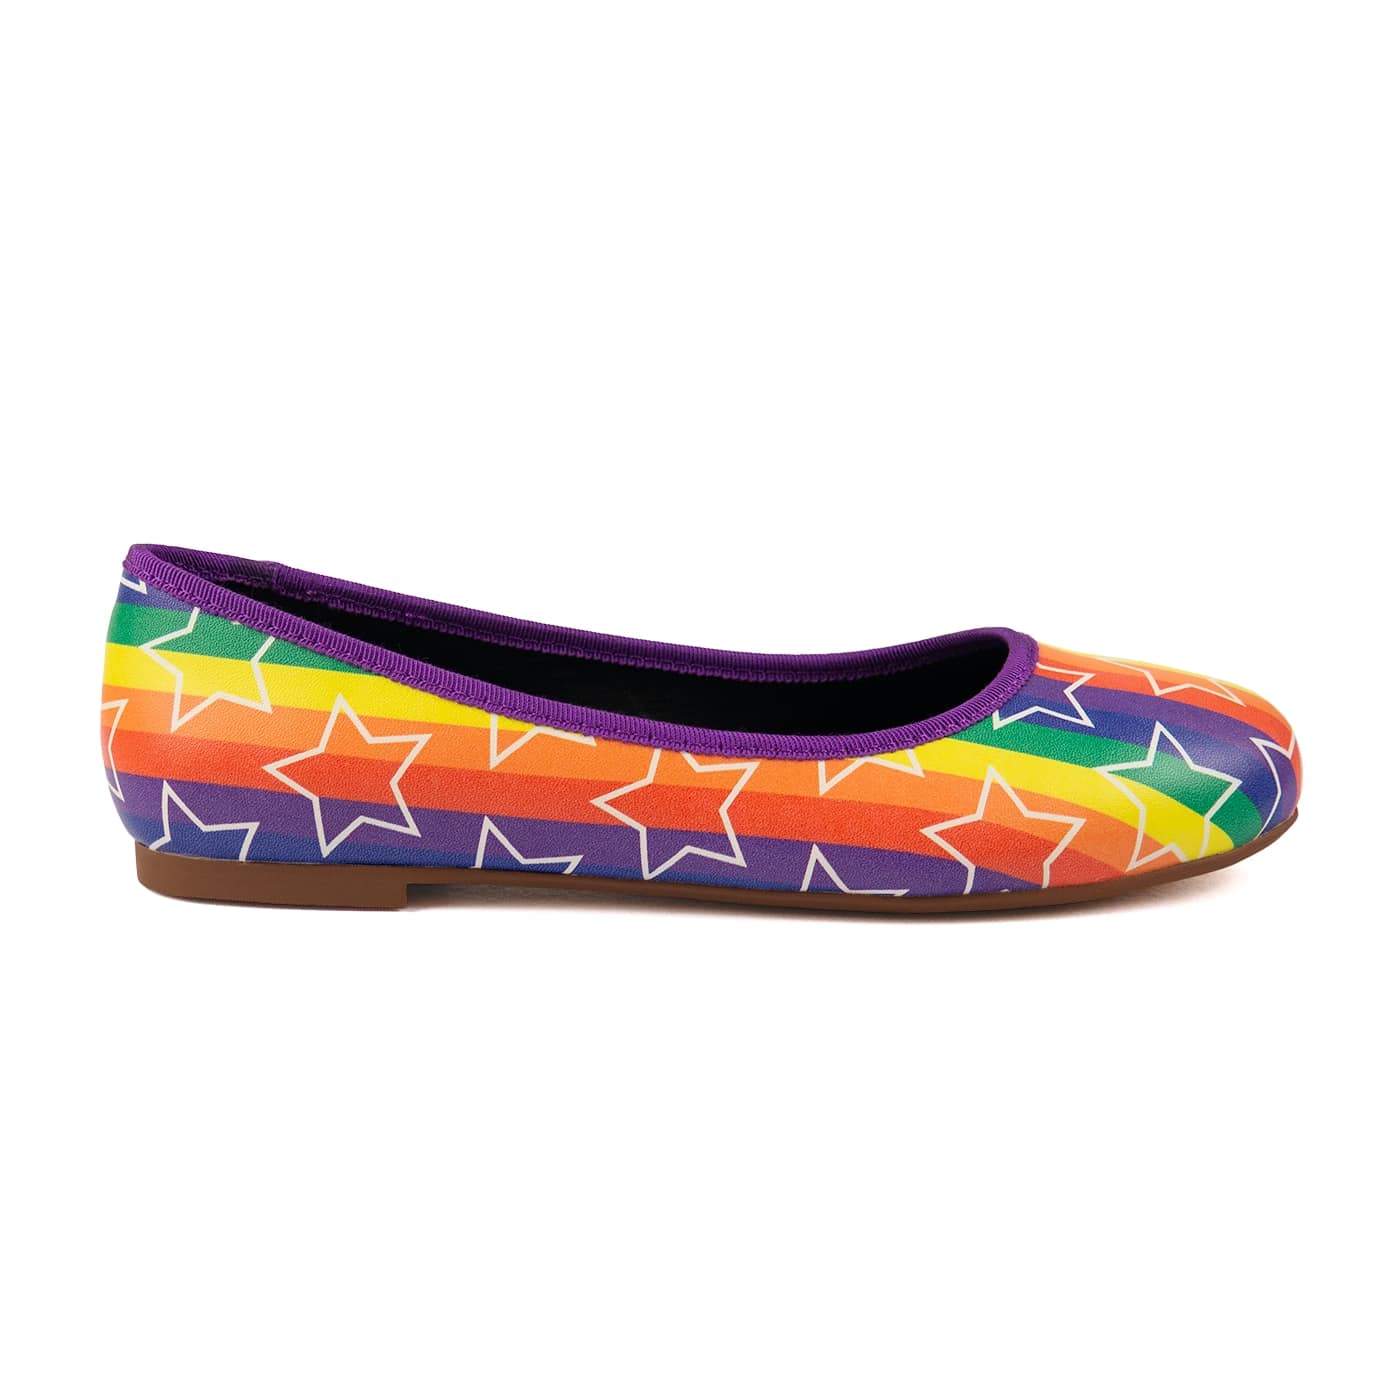 Starburst Ballet Flats by RainbowsAndFairies.com.au (Rainbow Brite Inspired - Stars - Mismatched Shoes - Pride - Rainbow Stripes - Slip On Shoes) - SKU: FW_BALET_STARB_ORG - Pic-04